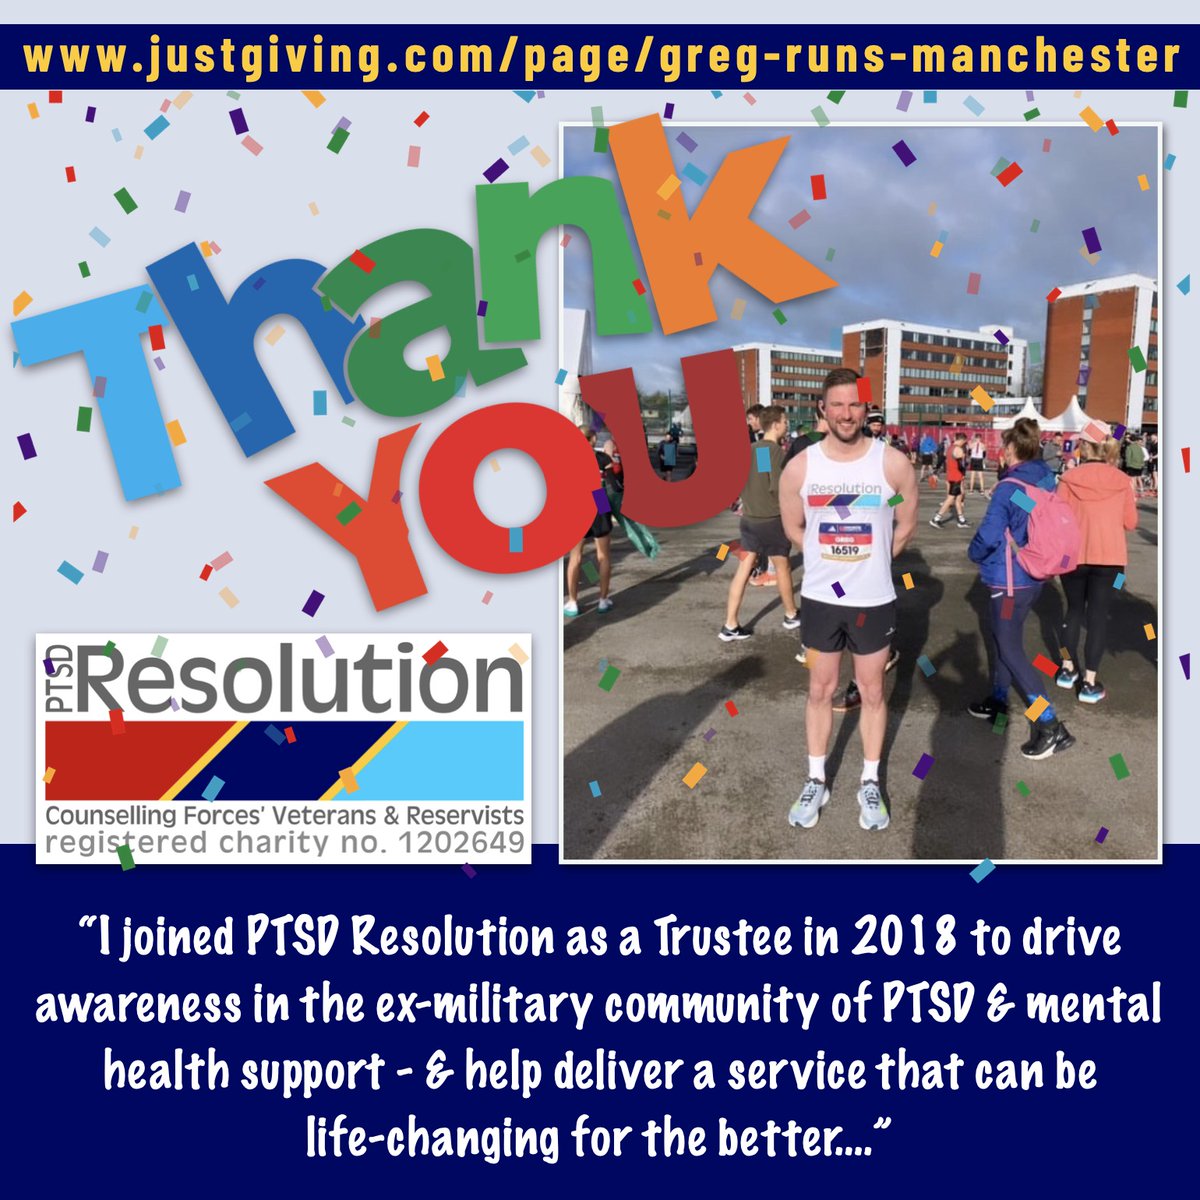 Huge thanks and congrats to Greg Vosper - who blitzed the #ManchesterMarathon on Sunday! All to raise funds - and awareness of #PTSDResolution! 🙏🤩🙏 Greg’s nearly reached his fundraising total! ➡️ justgiving.com/page/greg-runs… #Fundraising #MentalHealth #VeteransMentalHealth